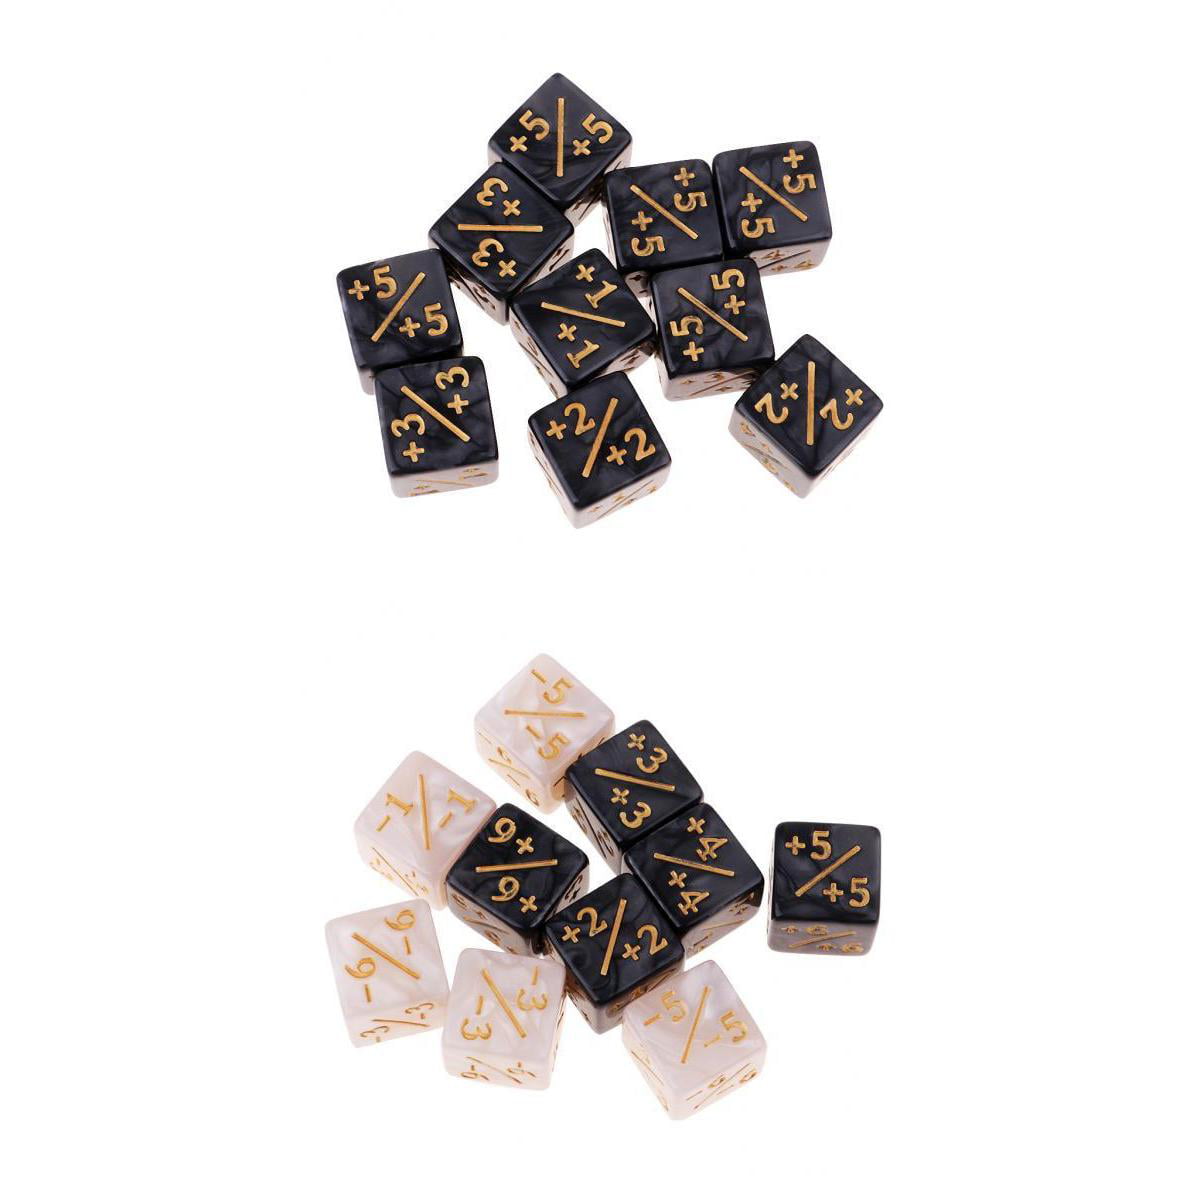 10pcs Resin Fractional Dice Set for Kids Math Addition Subtraction Learning 